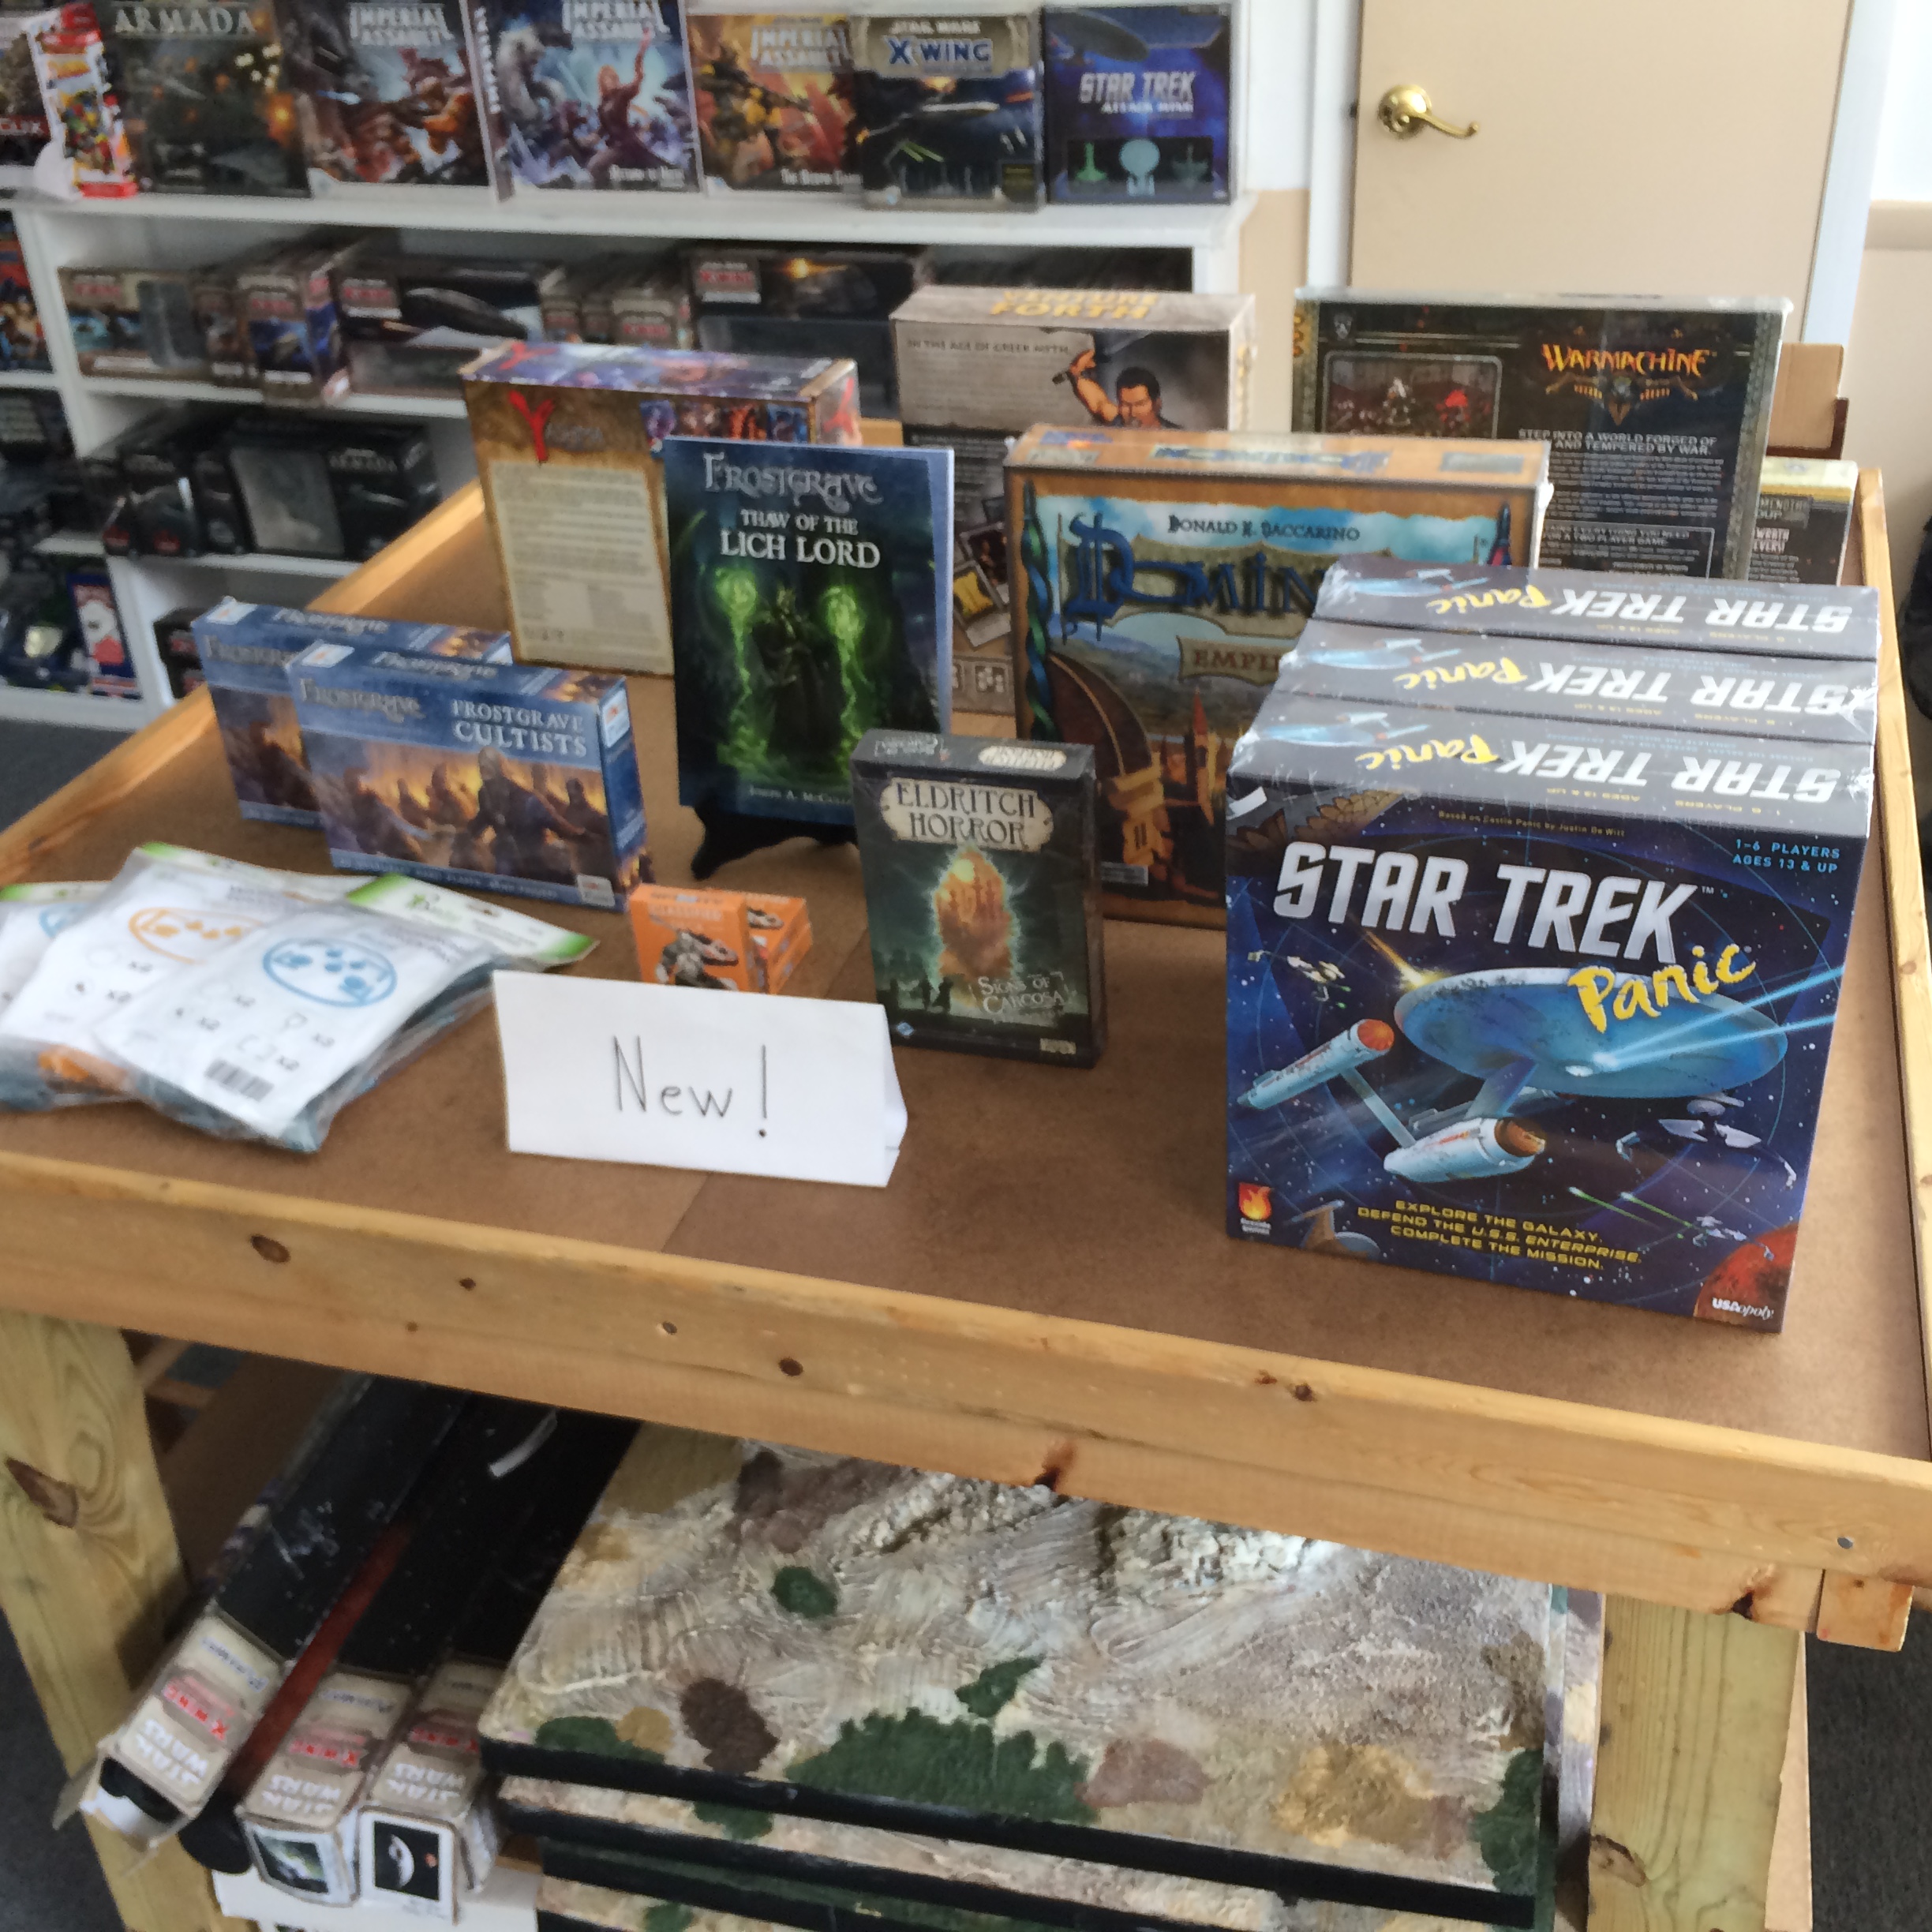 New Star Trek Panic, Eldritch Horror: Signs of Carcosa, and Dominion: Empires